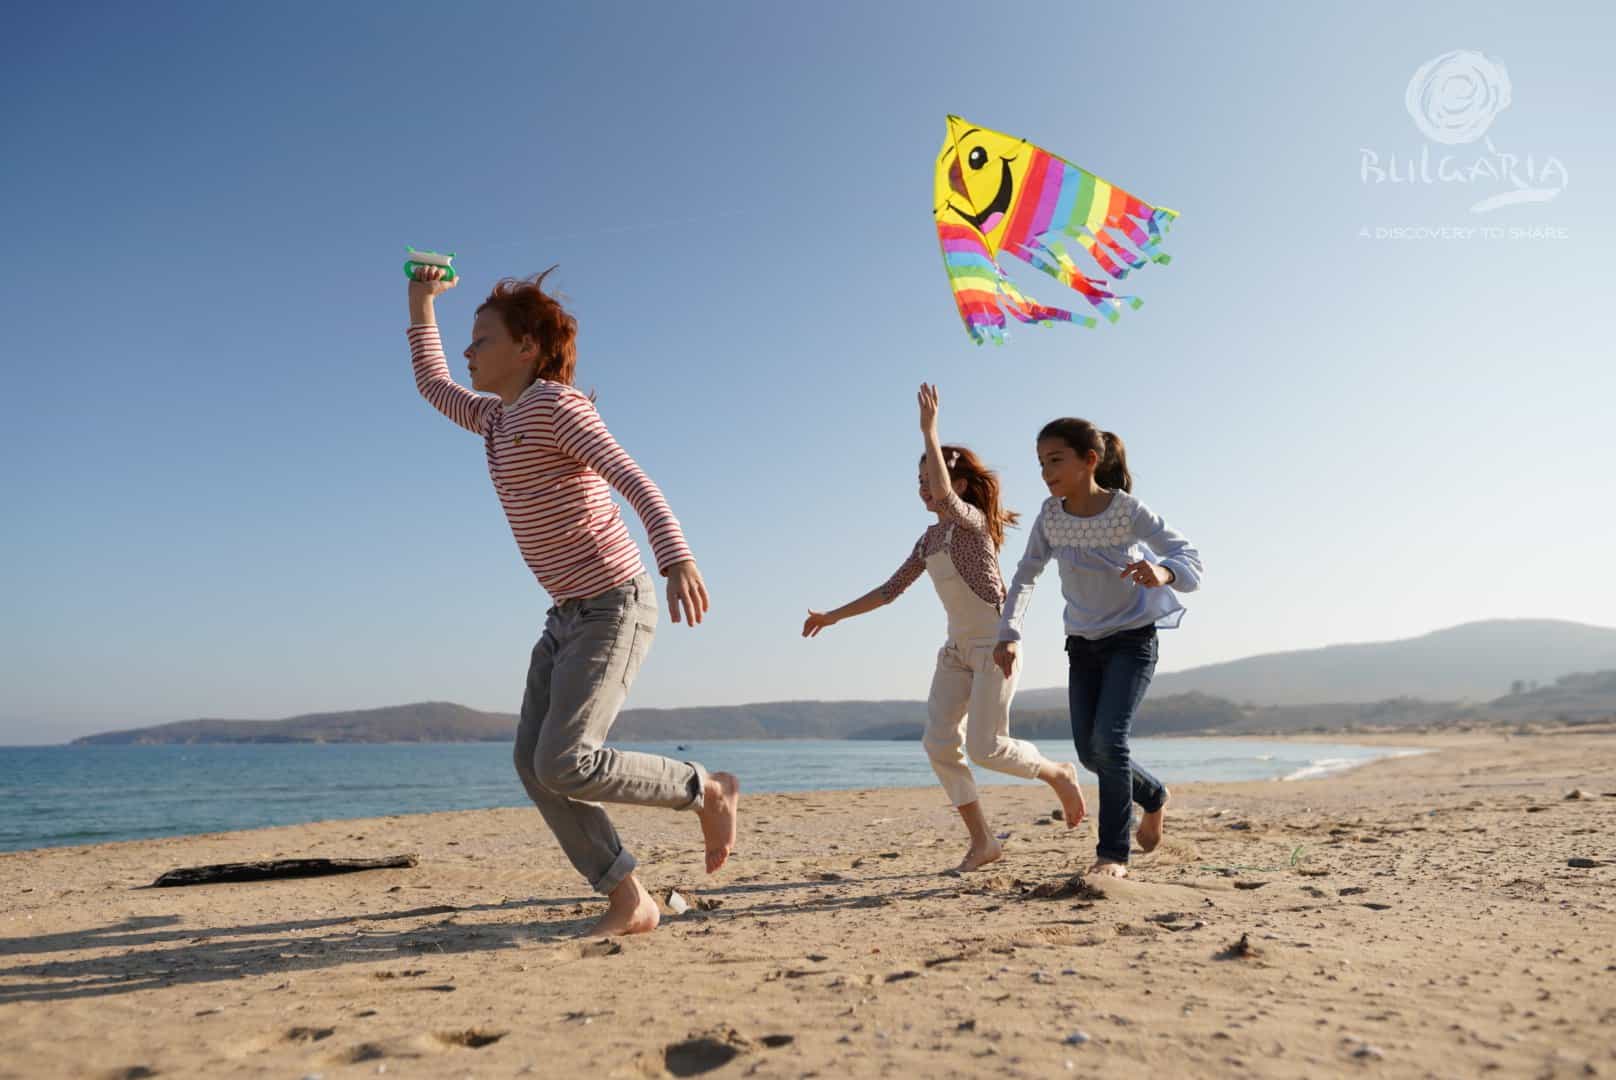 a group of kids running on a beach with a kite